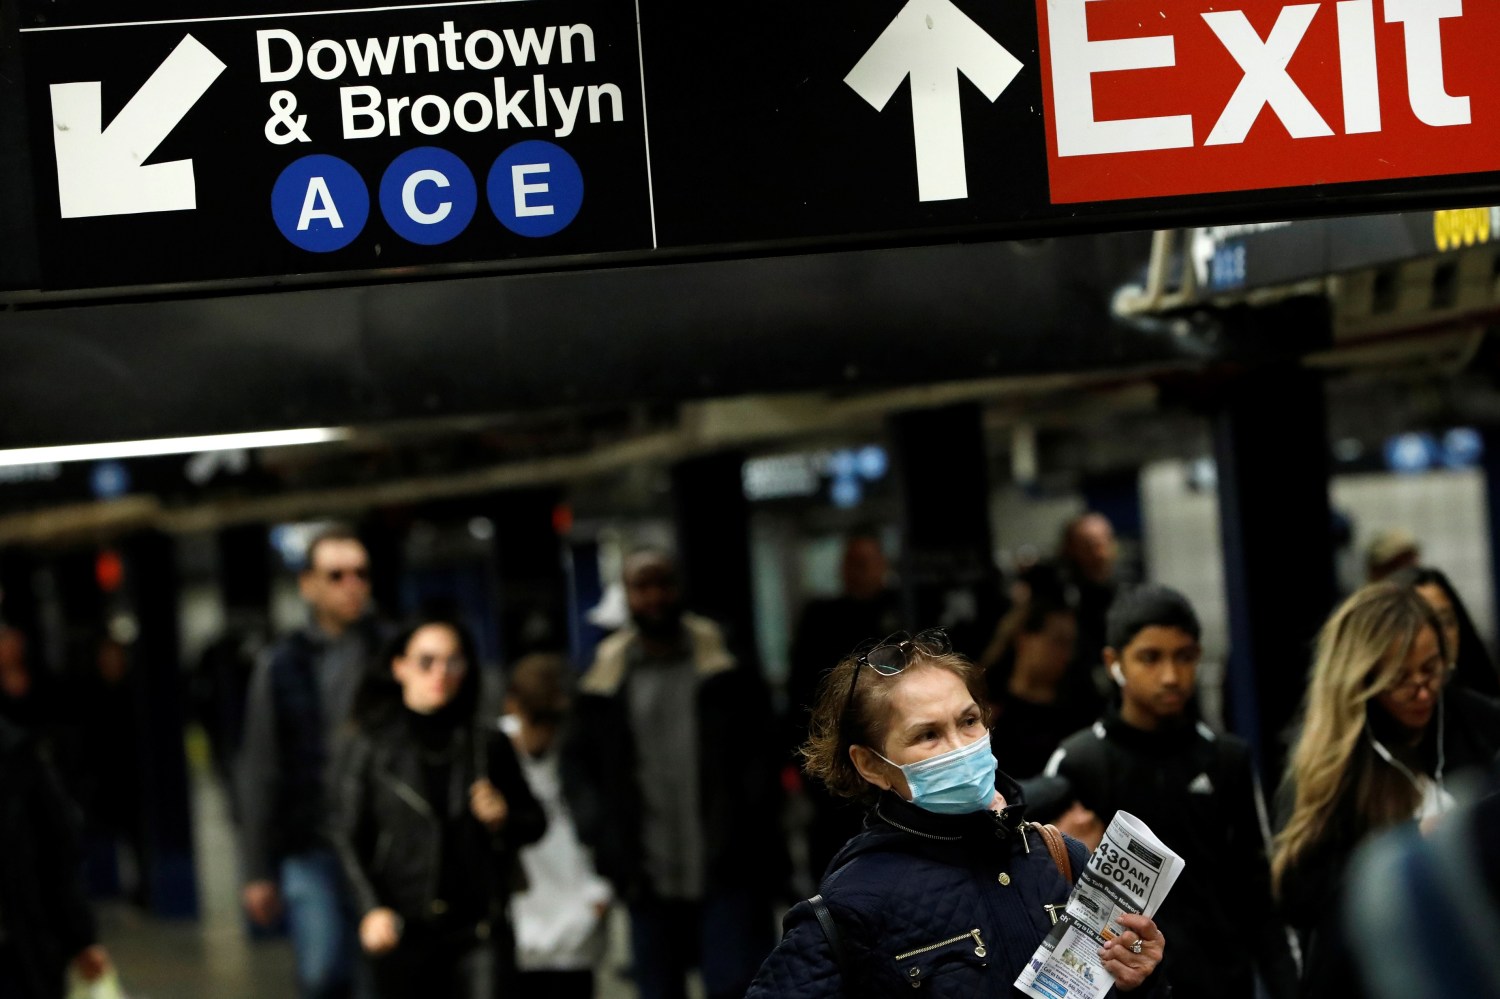 A person in a surgical mask walks through the 42nd Street Subway Station as the coronavirus outbreak continued in Manhattan, New York City, New York, U.S., March 13, 2020. REUTERS/Andrew Kelly